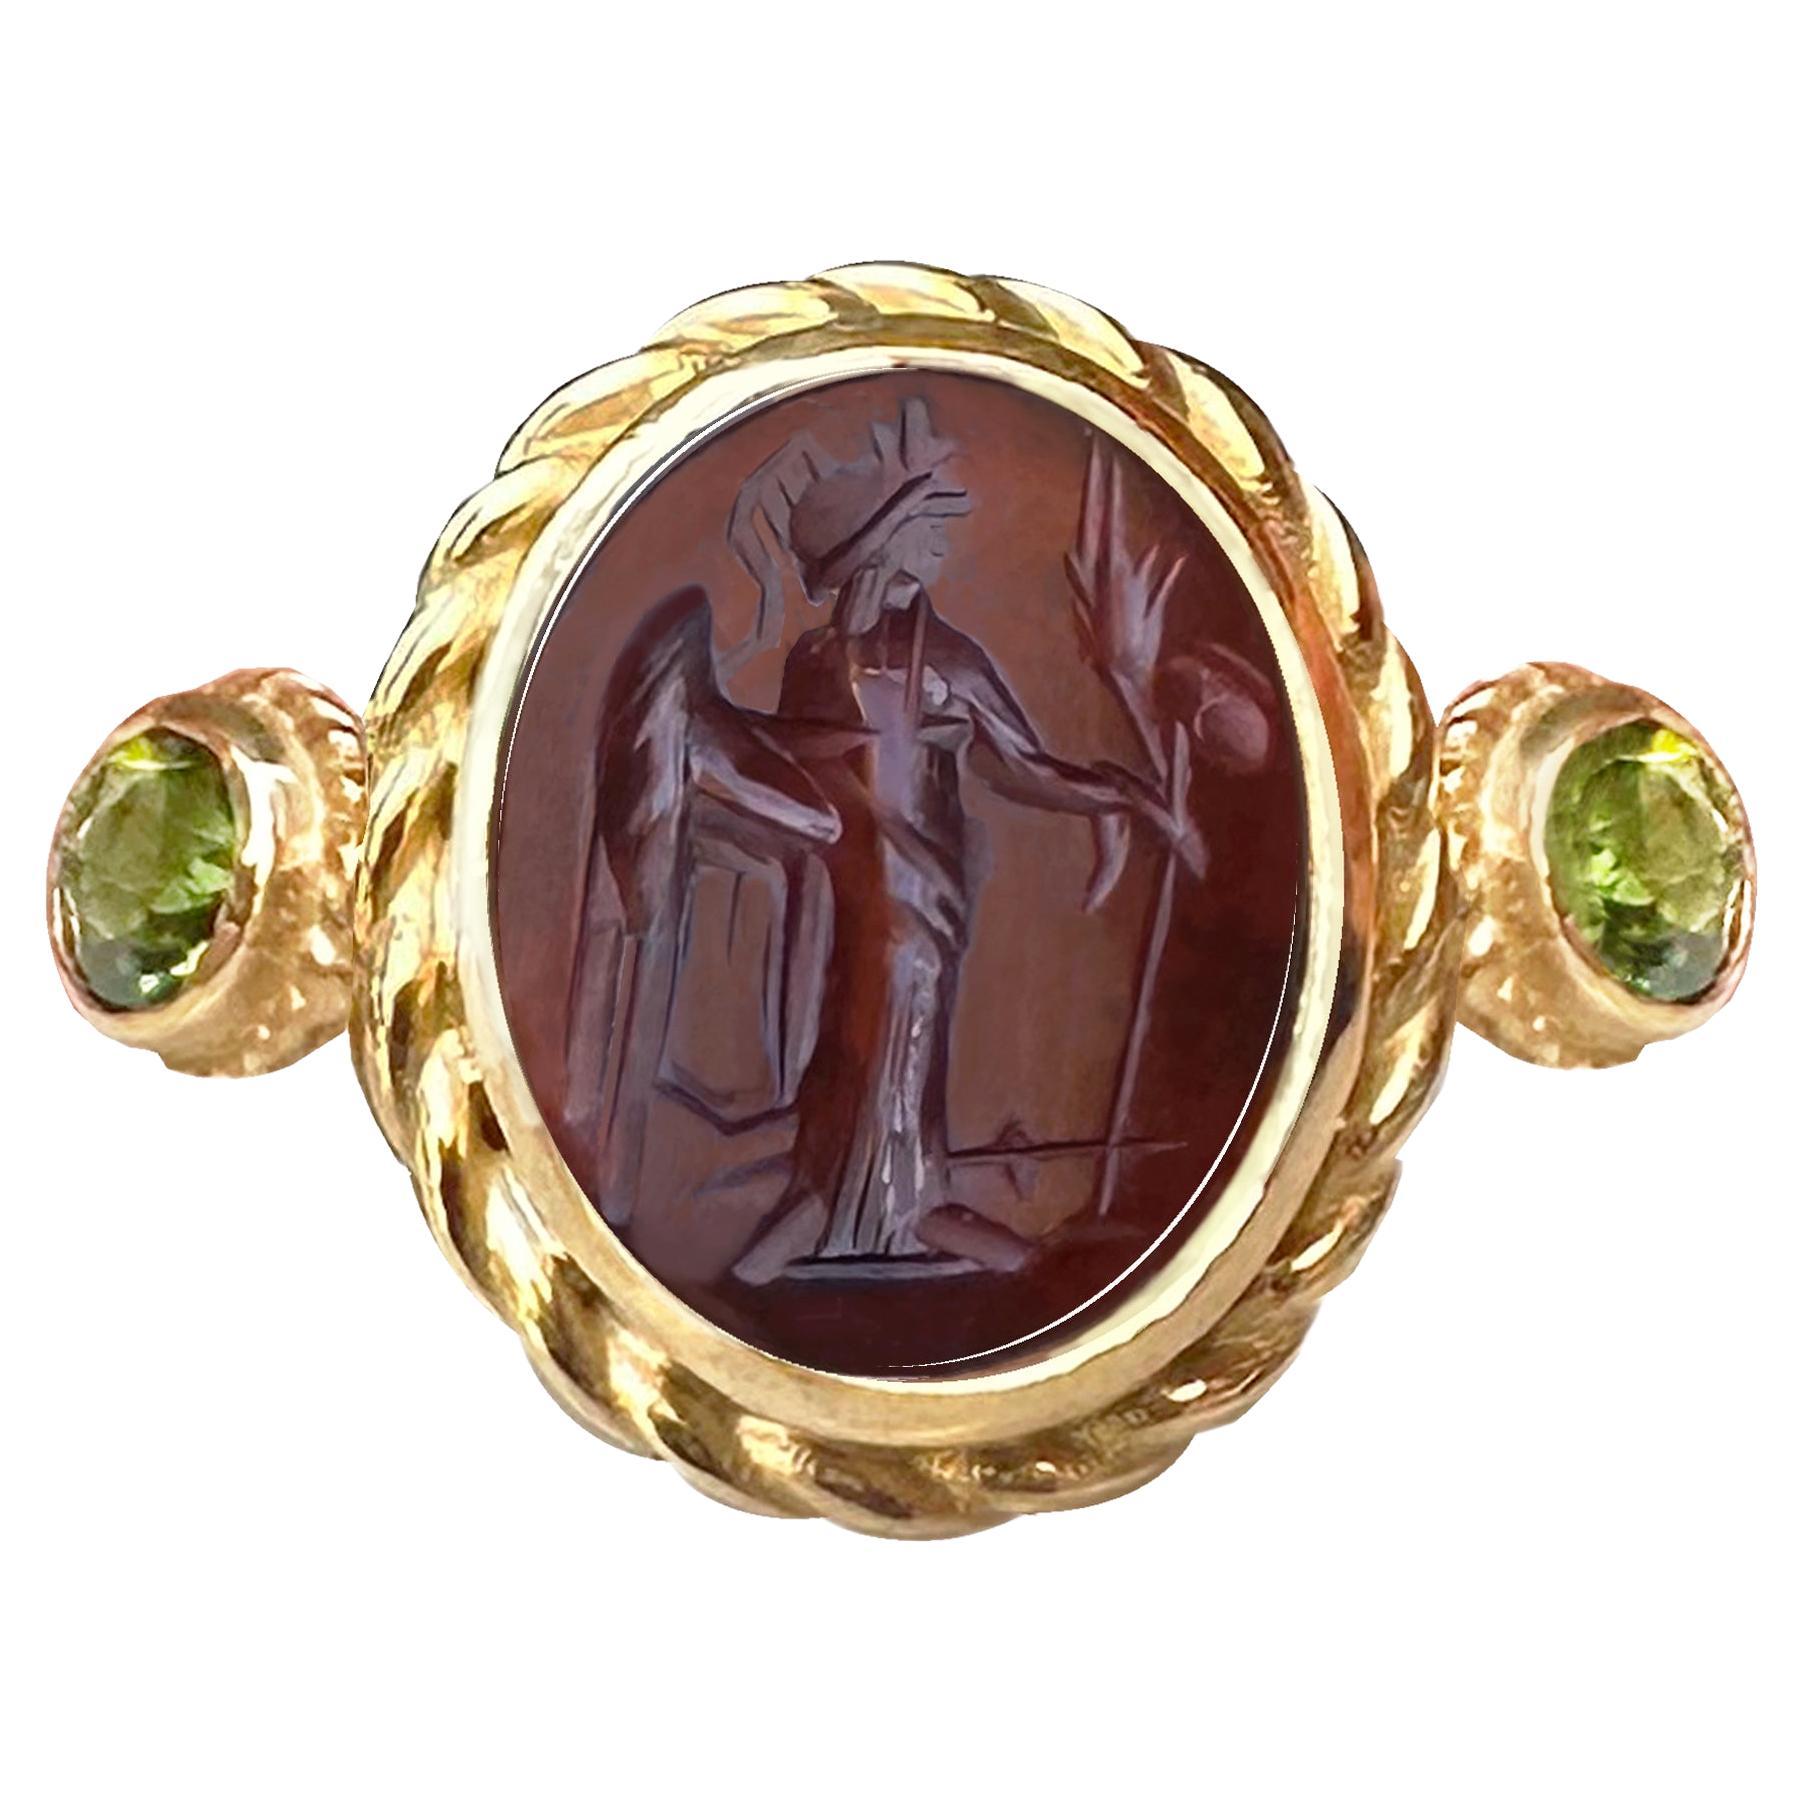 Roman Carnelian Iintaglio 1ST-2ND Cent. AD 18 KT Gold Ring Depicting Demeter For Sale